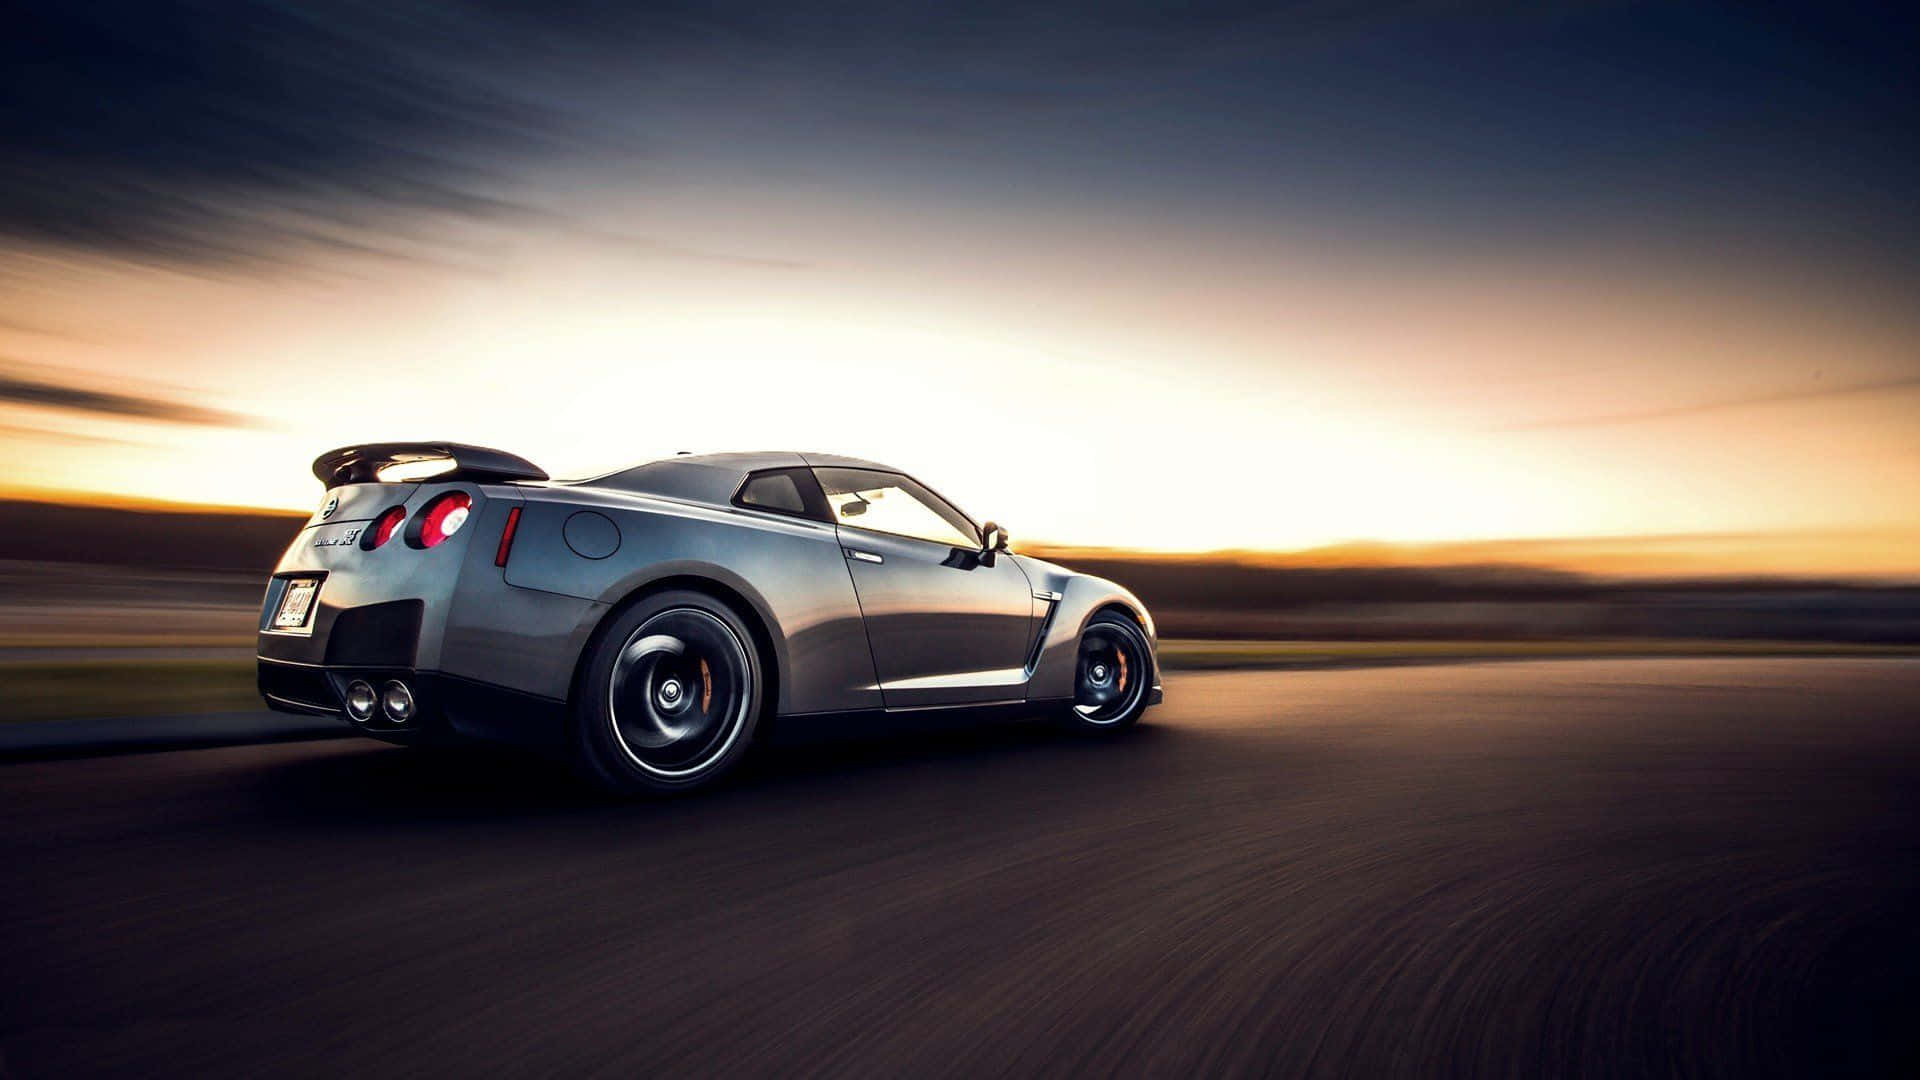 Cool Gtr - Blend Of Style And Performance Background